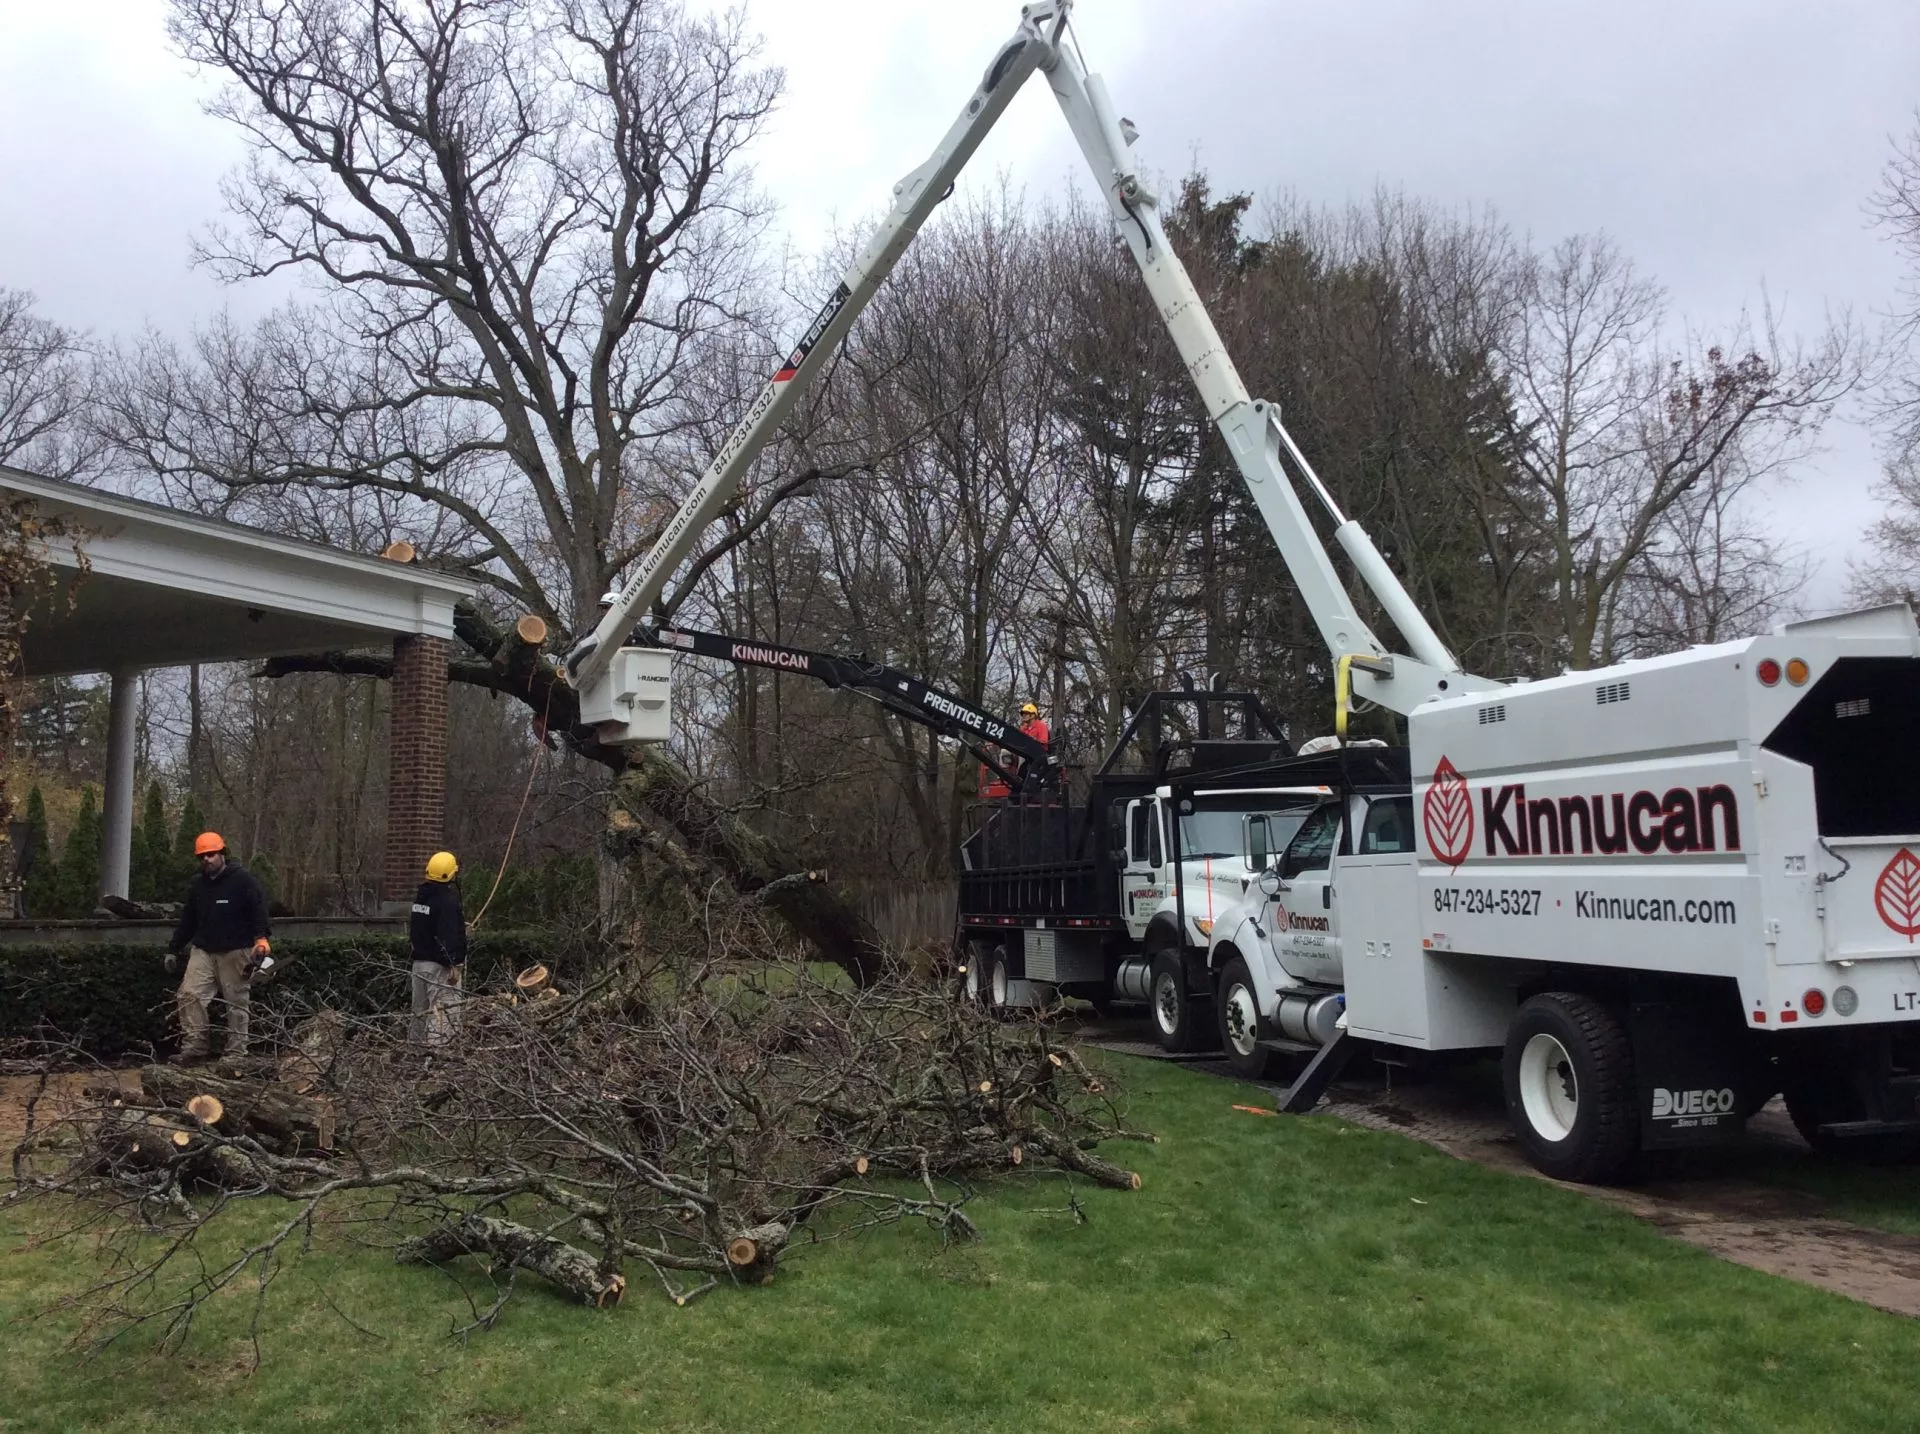 The Kinnucan Crane removing the North Shore storm damage fallen tree